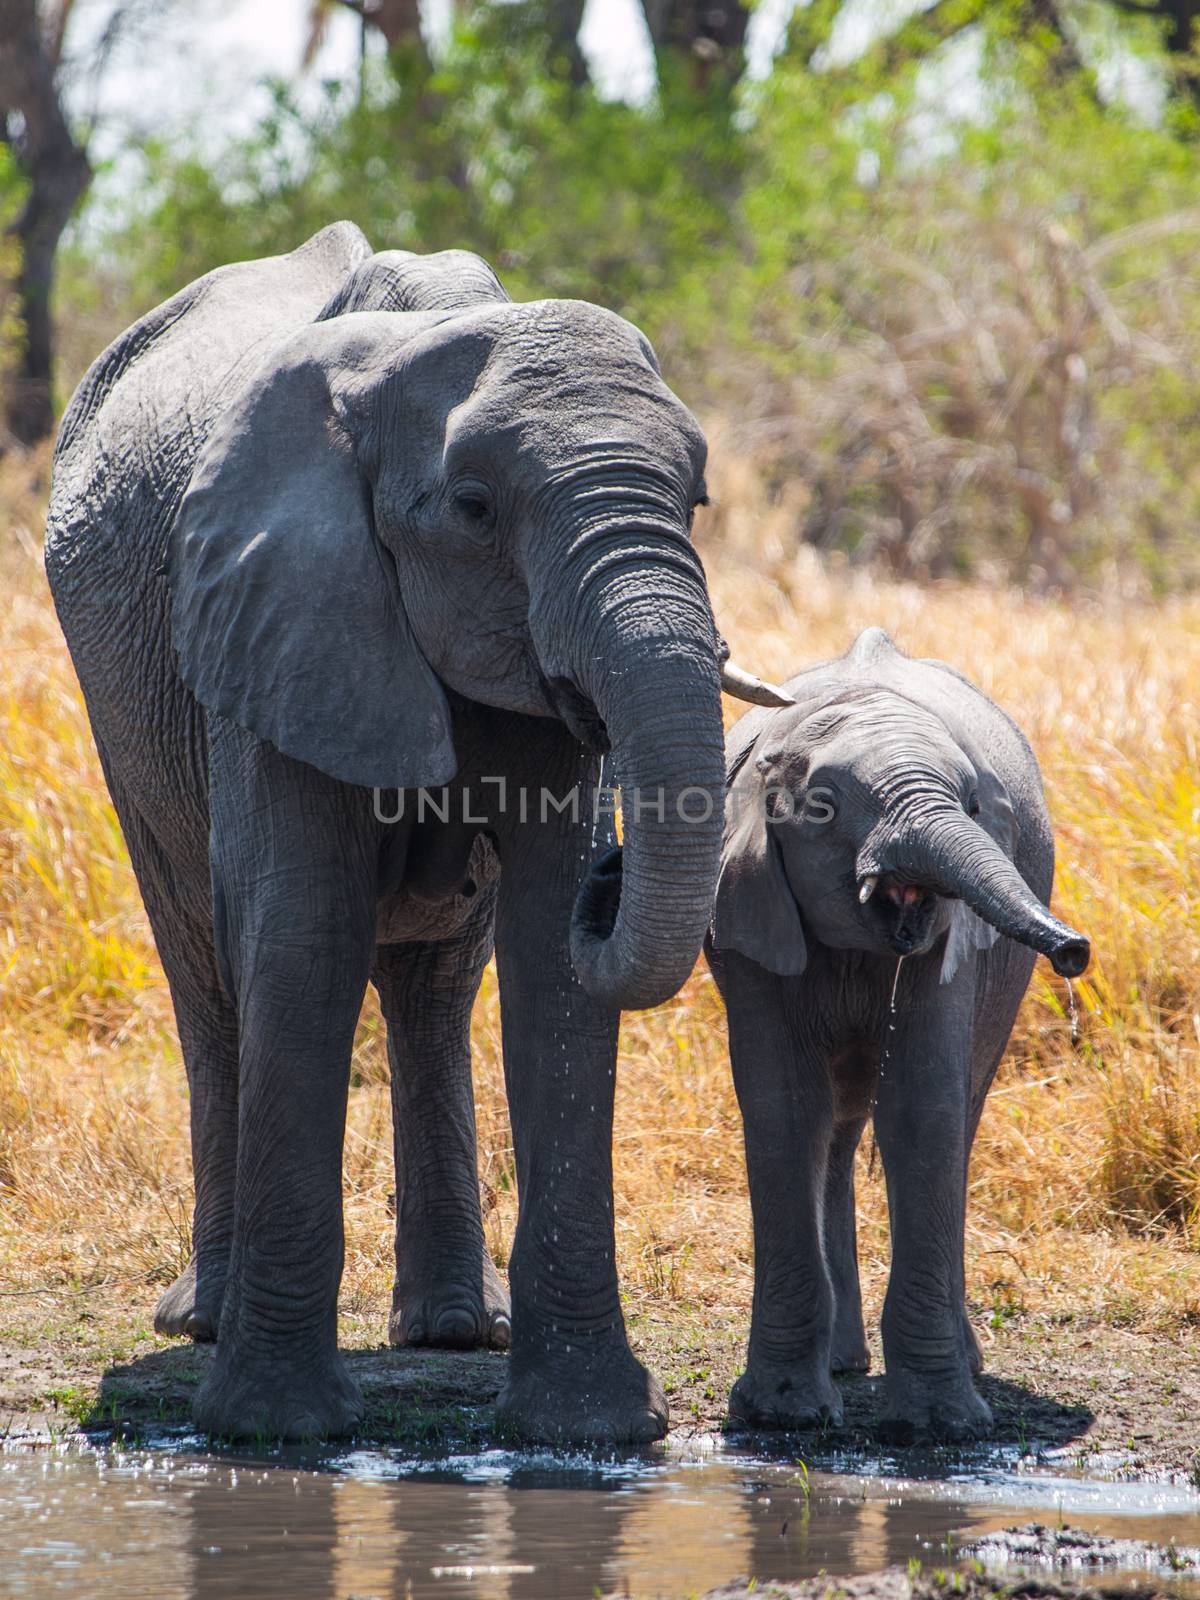 Elephants at water hole by pyty